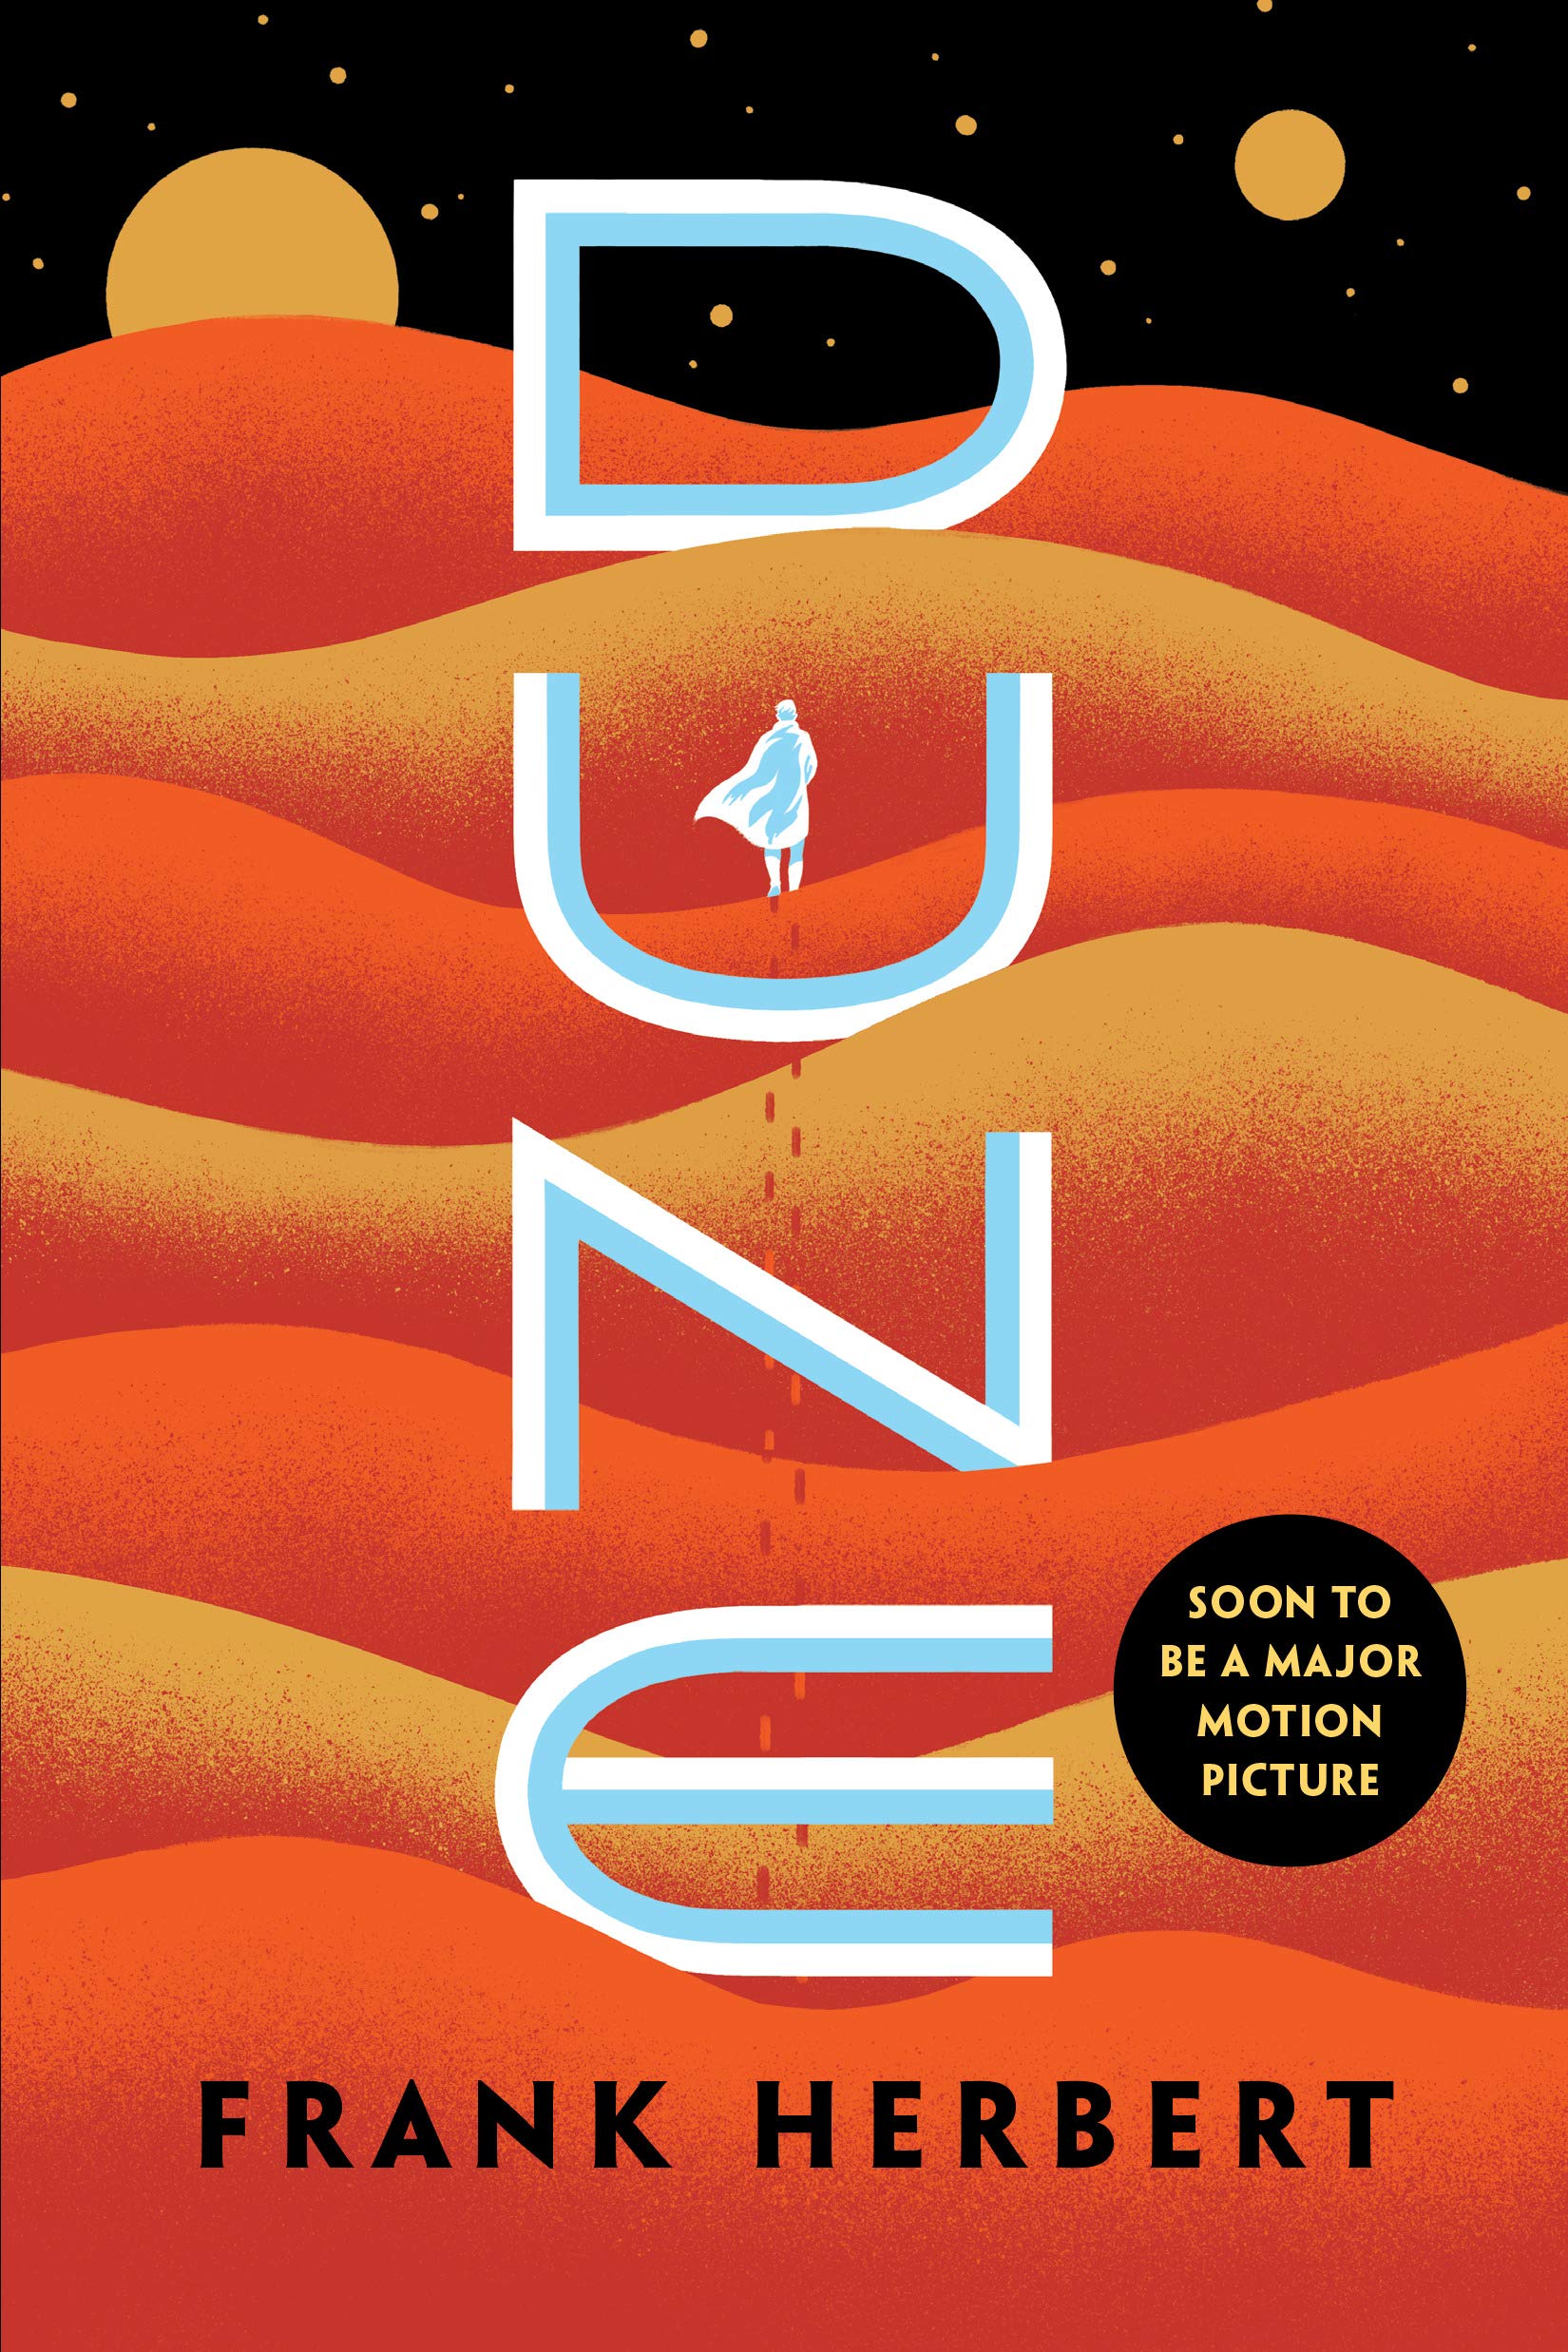 The cover of Dune by Frank Herbert